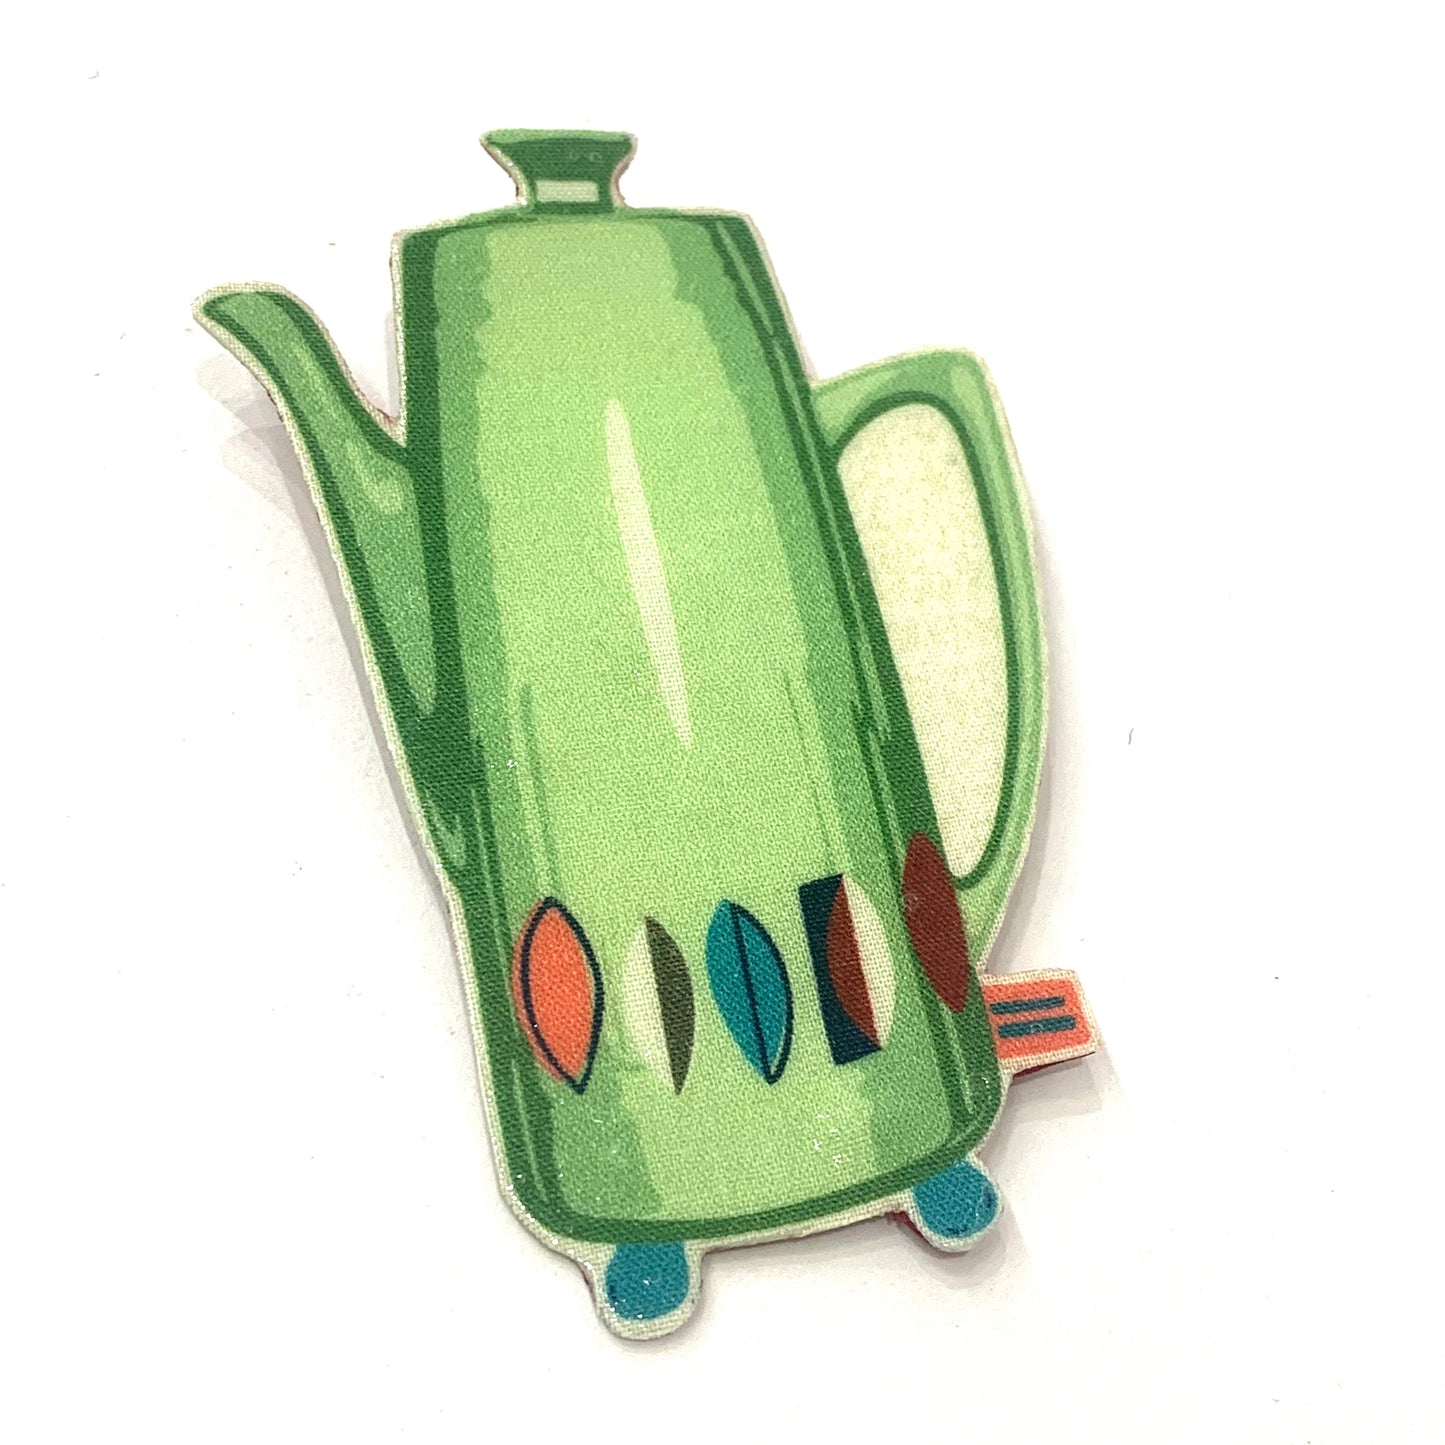 THIS BIRD HAS FLOWN- Fabric Remnant Brooches- Retro Green Coffee Pot